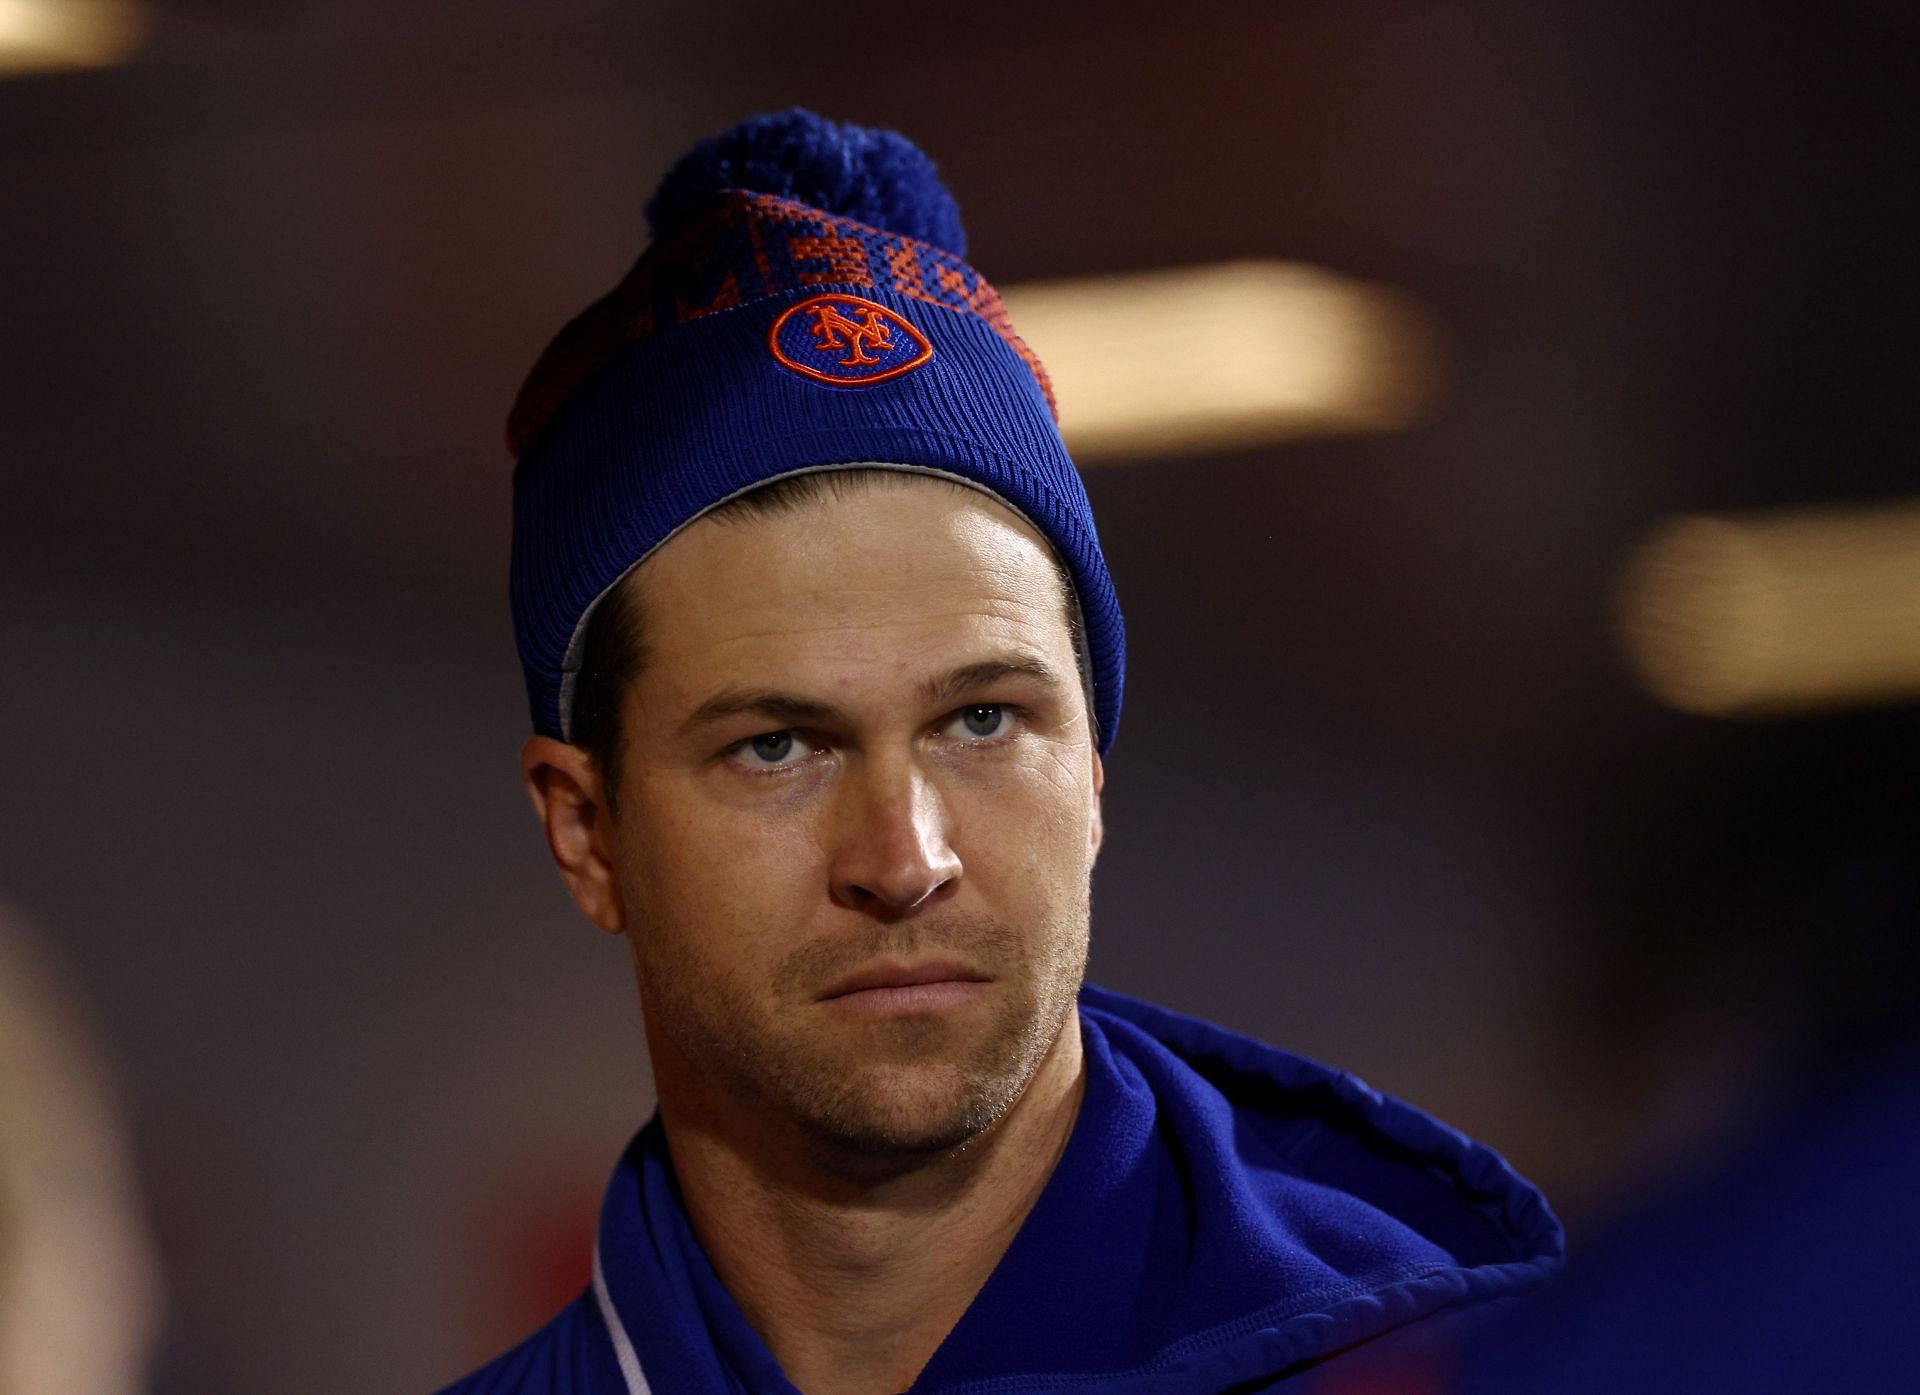 Did Jacob deGrom really mean what he said at his Rangers introduction?